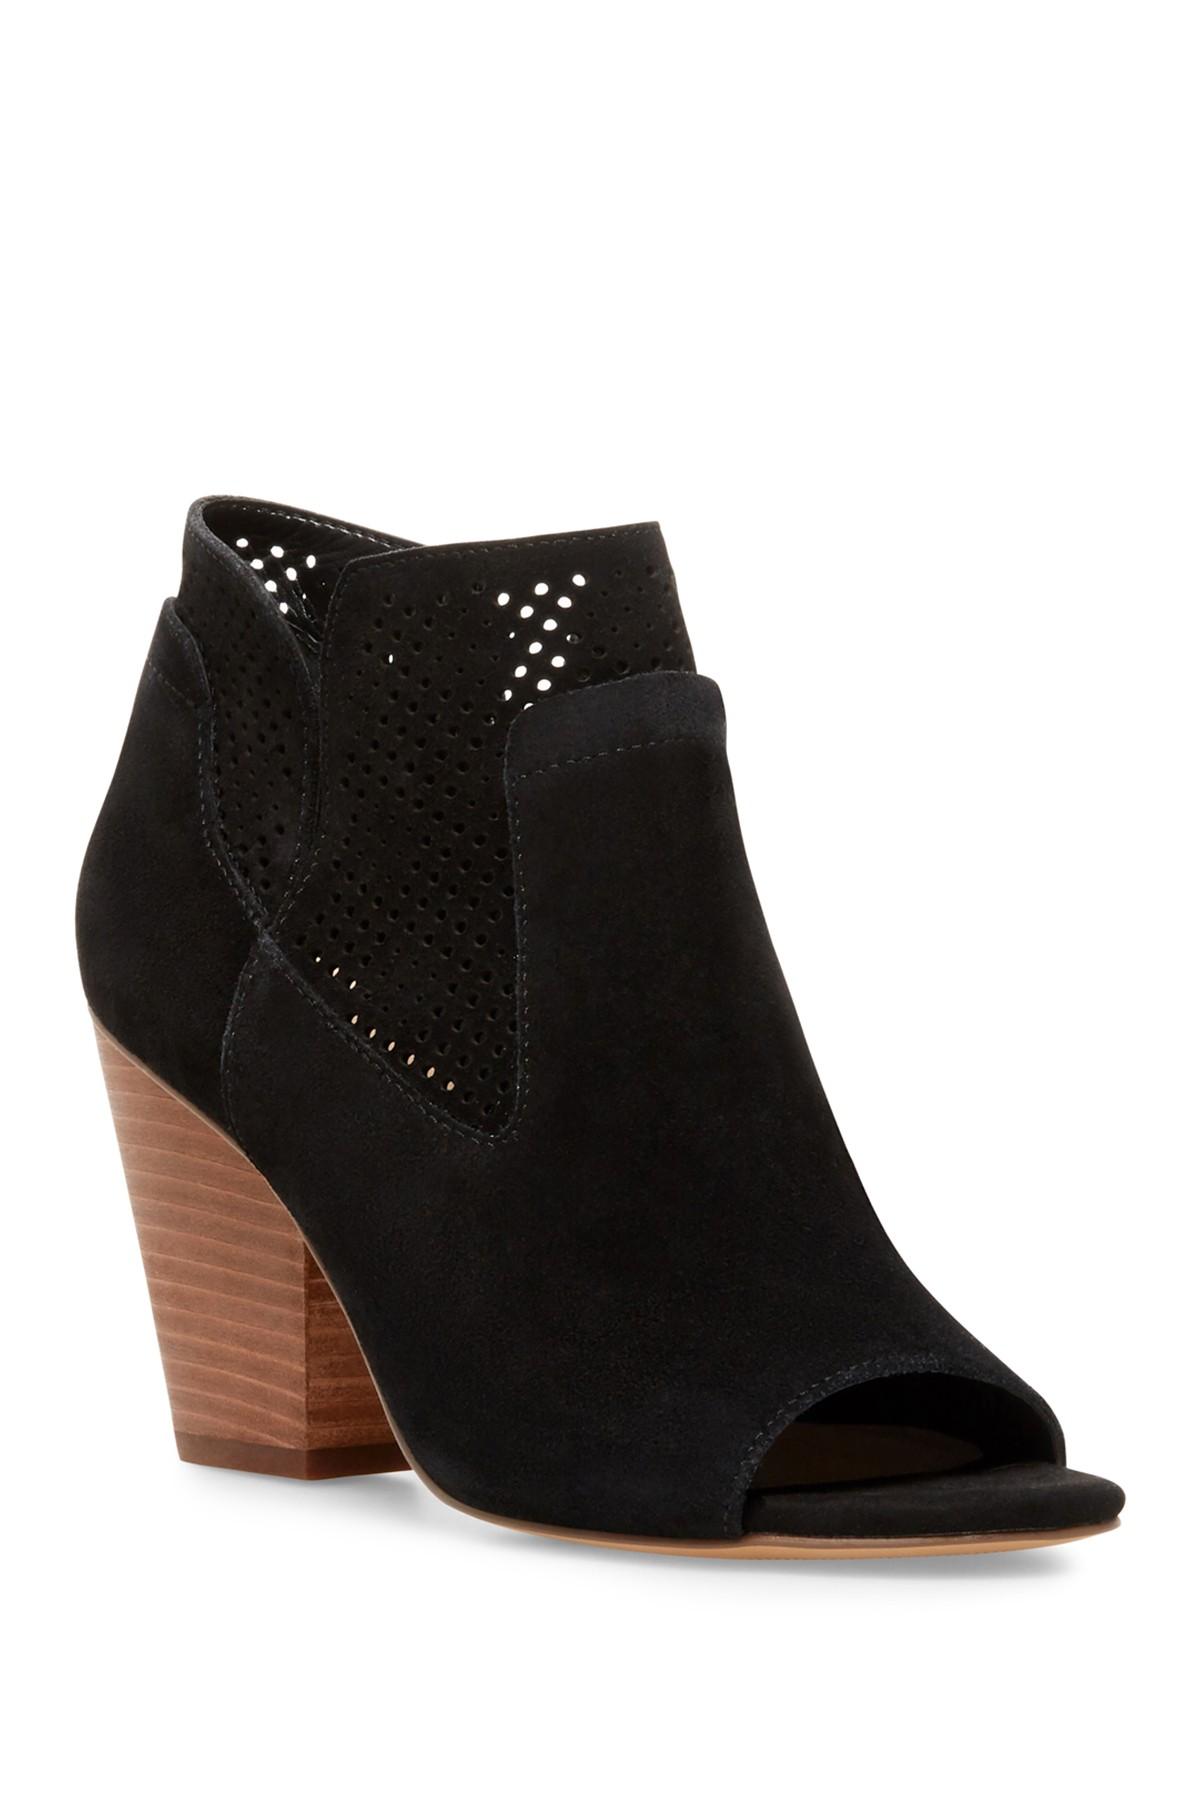 Steven by Steve Madden Suede Ready Perforated Stack Heel Bootie in ...